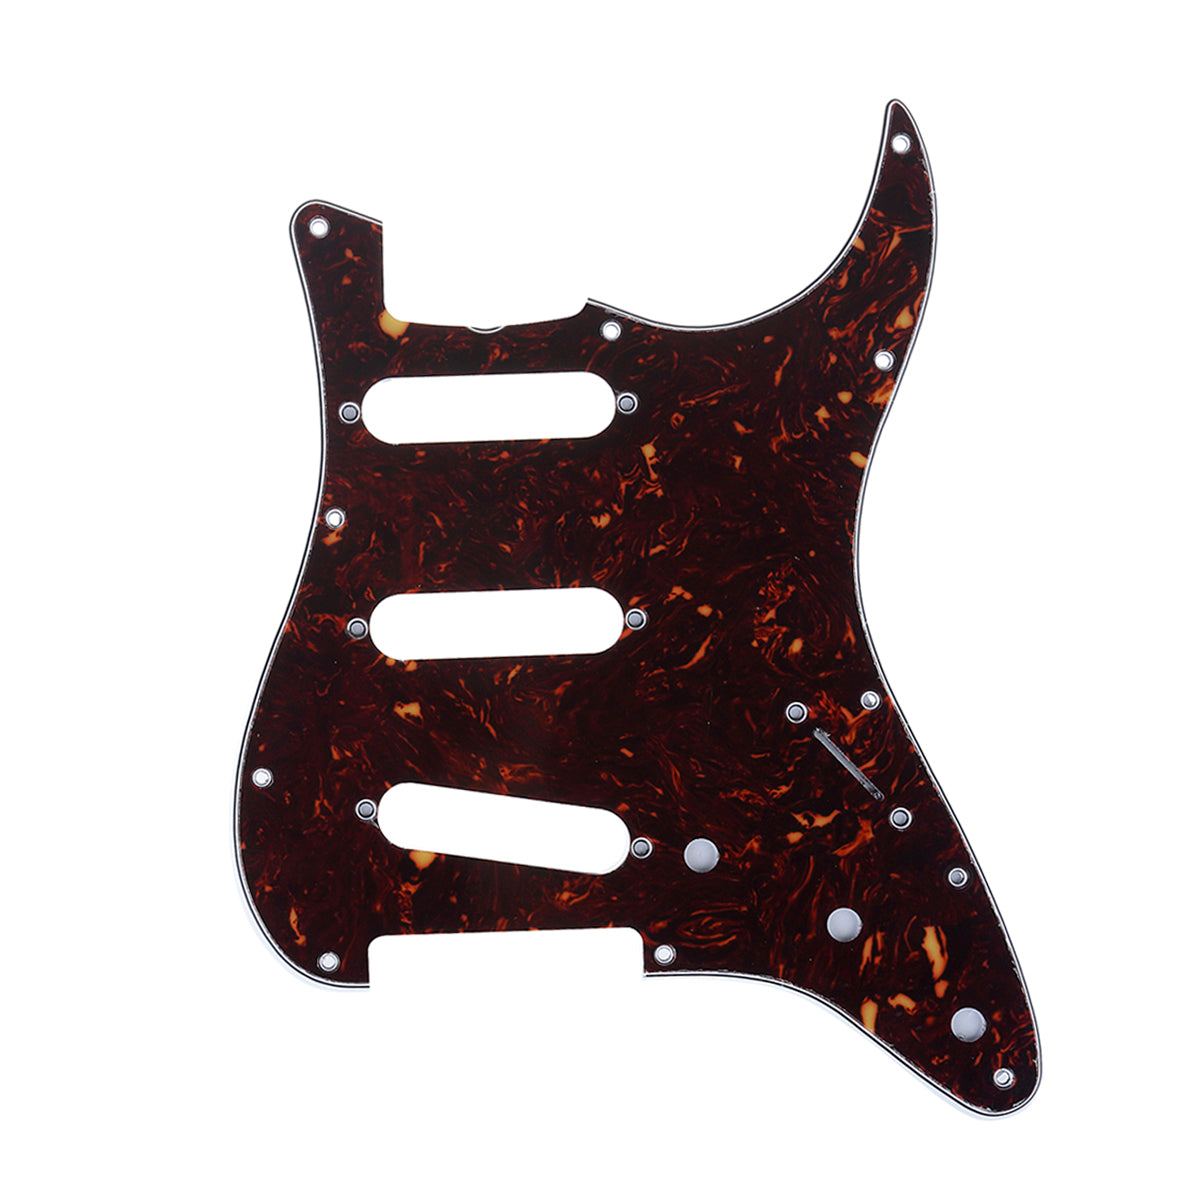 Musiclily Pro 11-Hole 62 Vintage Style SSS Strat Guitar Pickguard for American Stratocaster 62, 4Ply Tortoise Shell